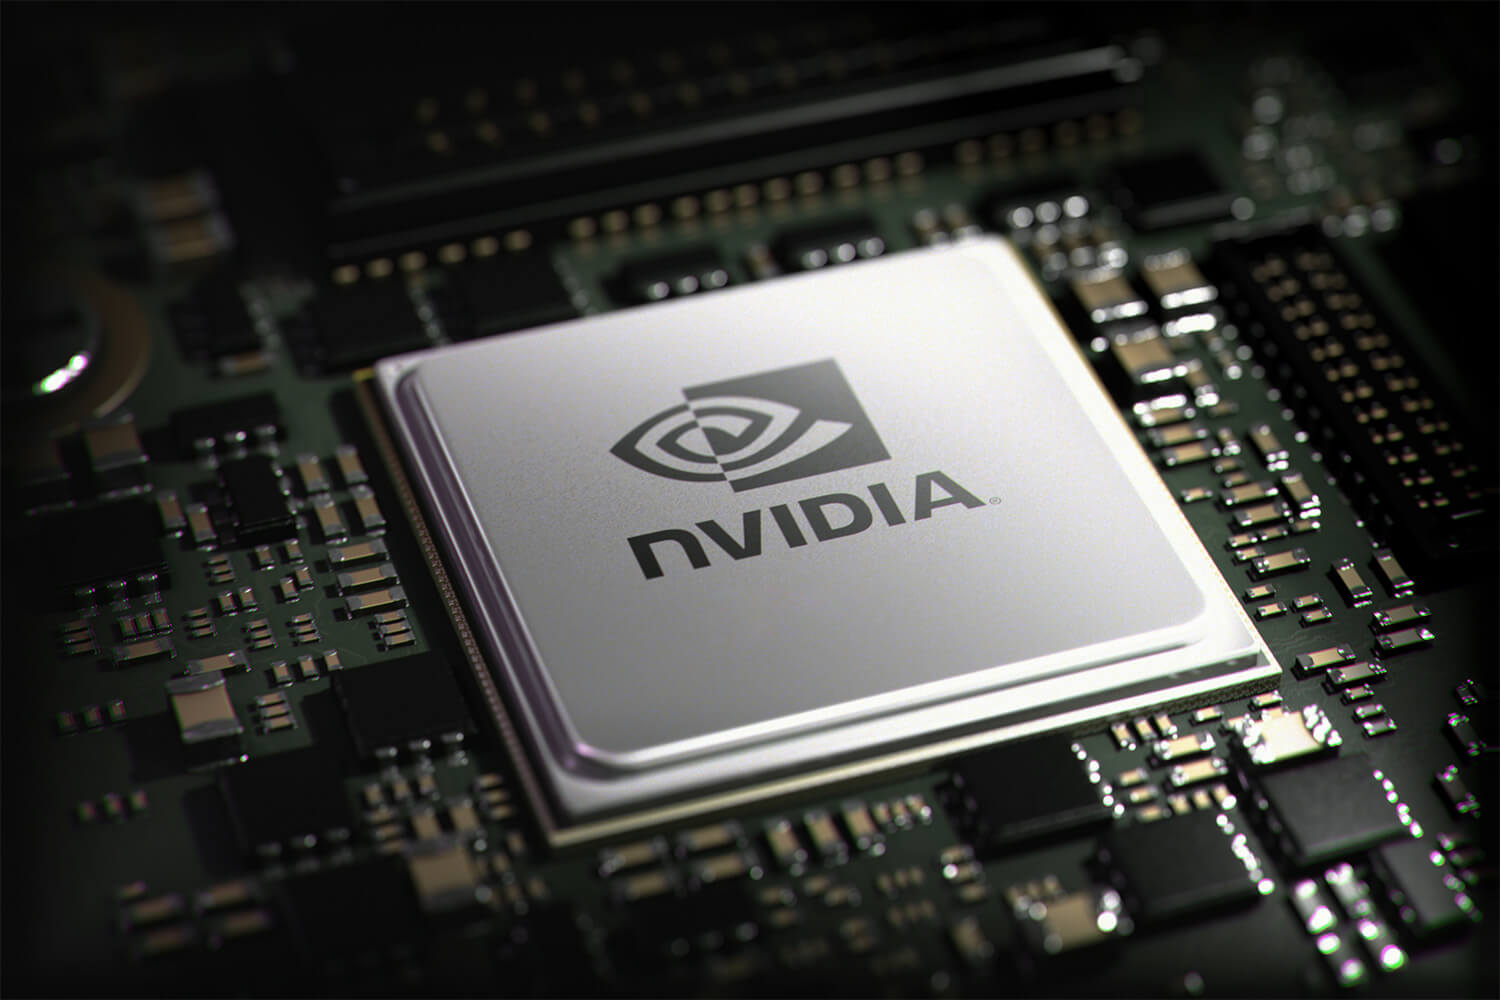 Nvidia boss: Moore's Law is dead, GPUs will soon replace CPUs